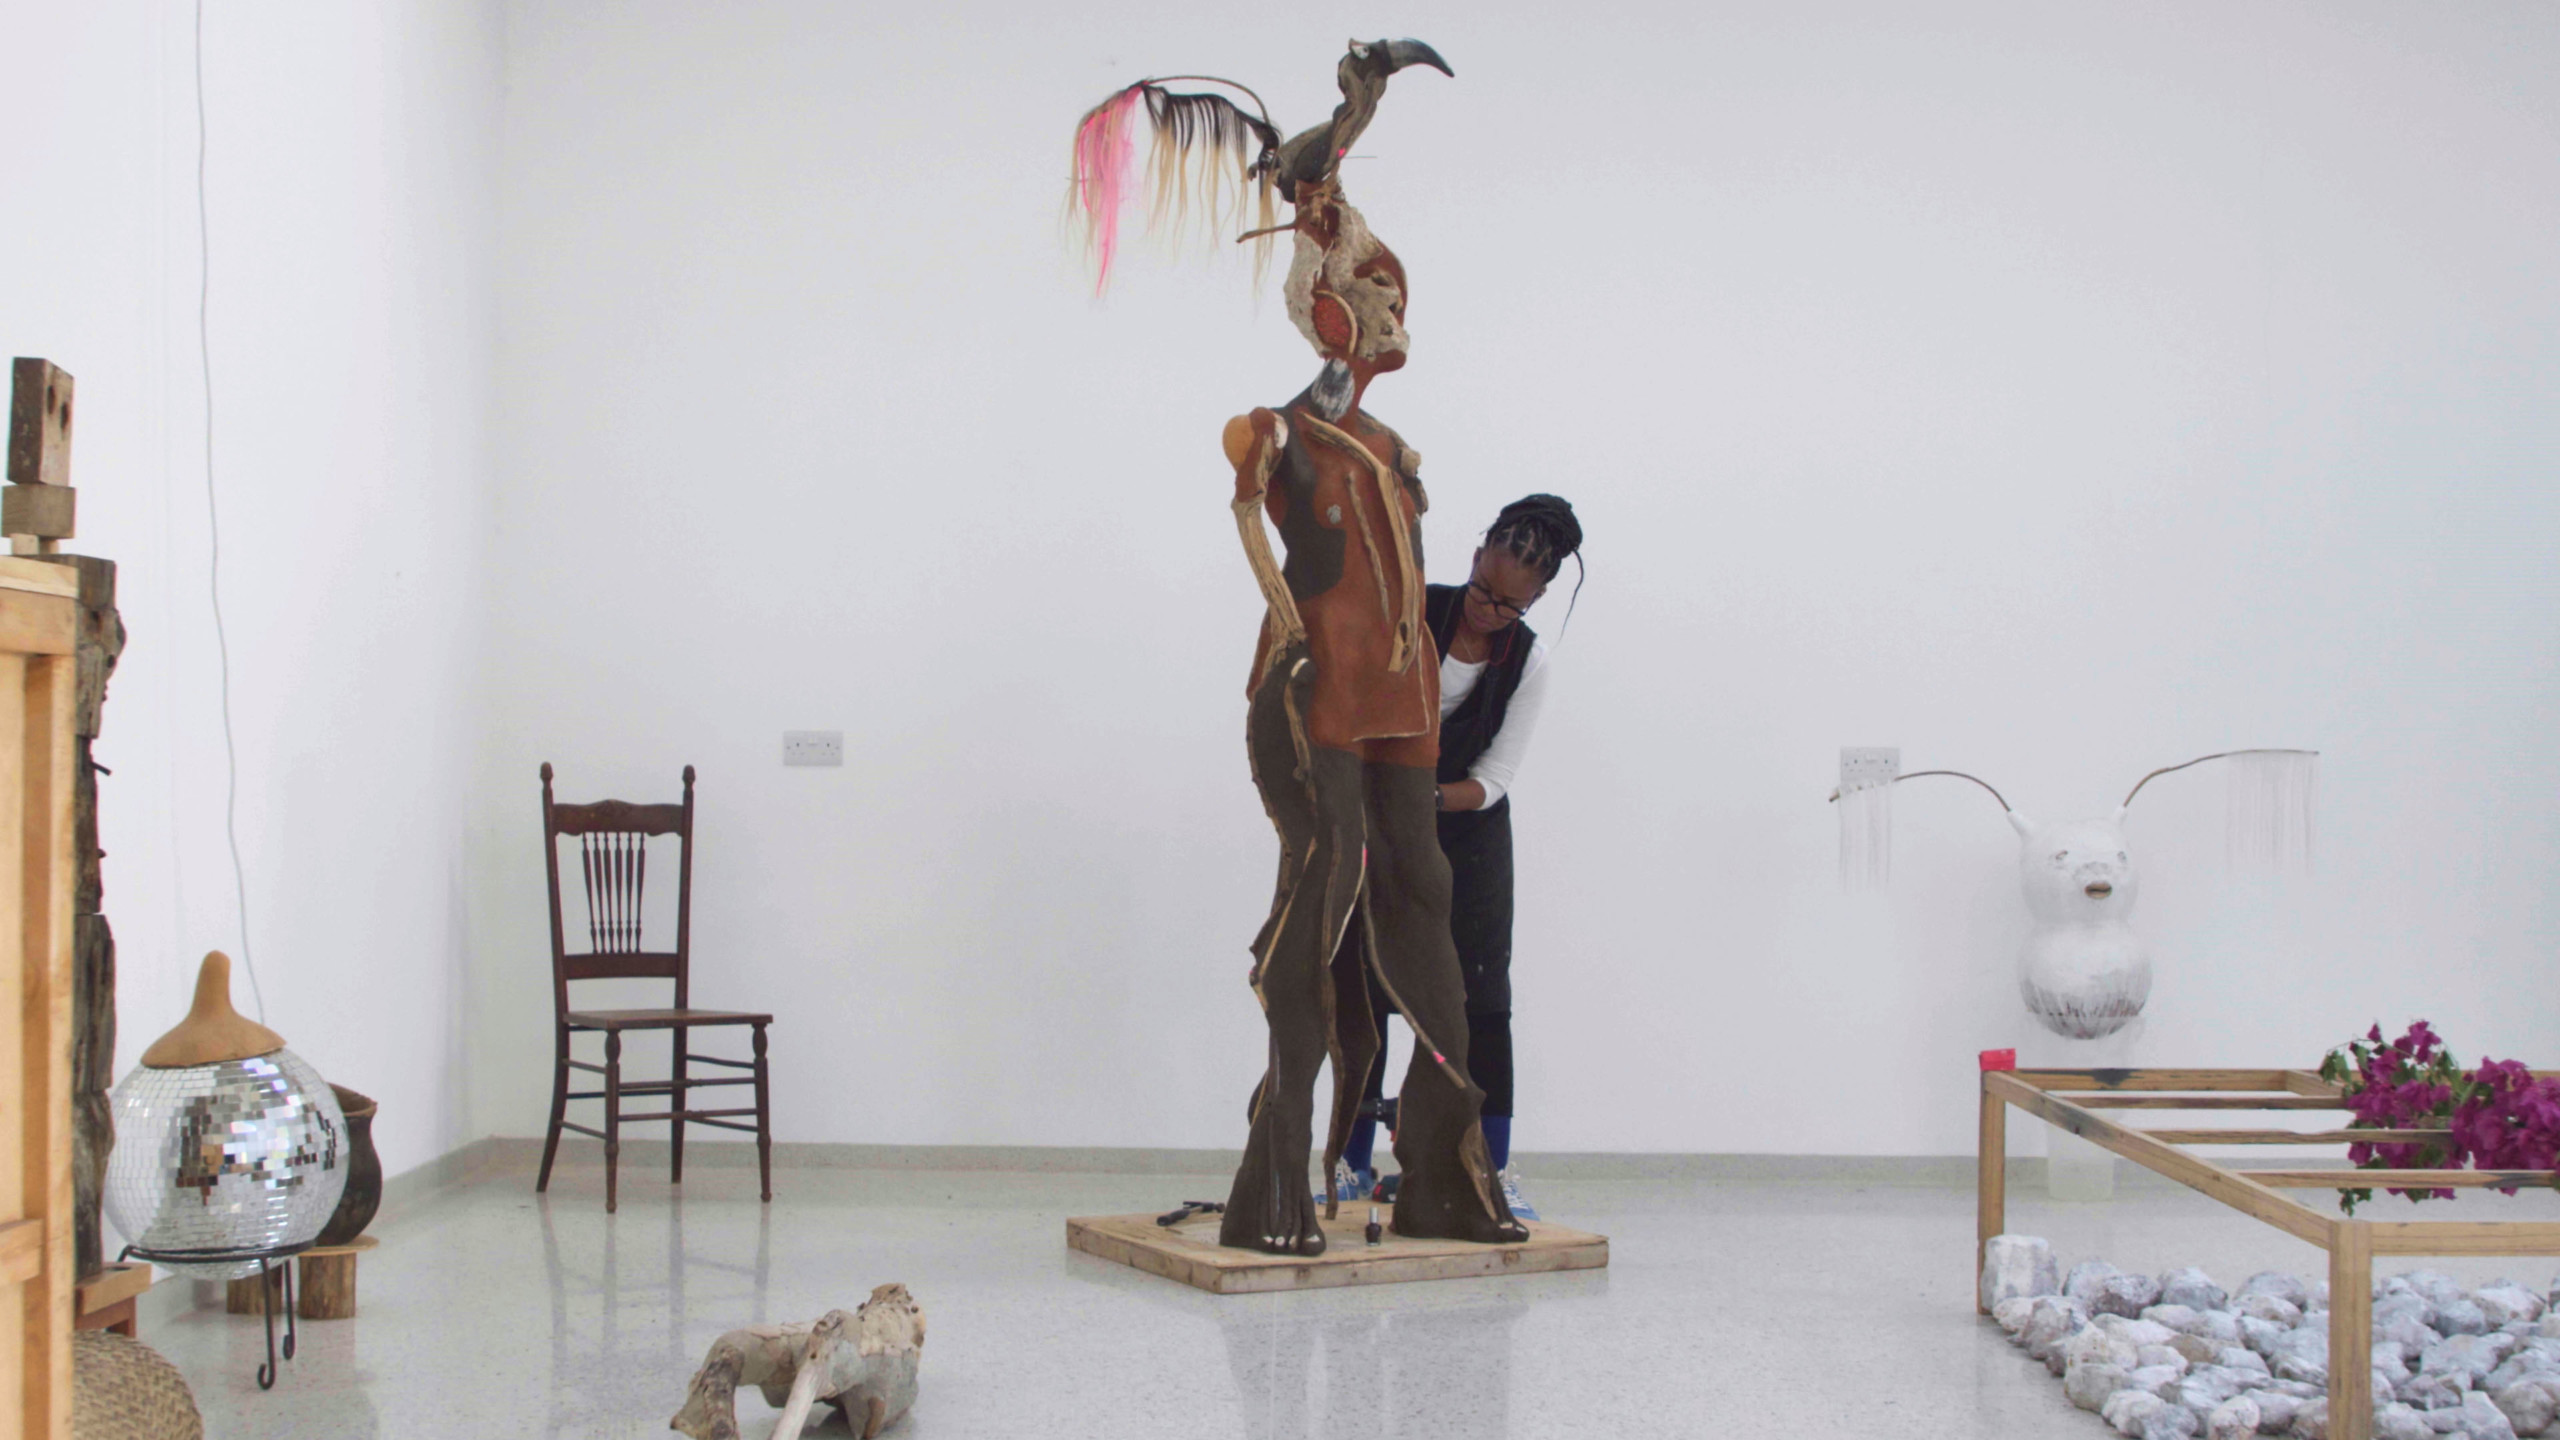 Production still from the Art21 Extended Play film, Wangechi Mutu: Between the Earth and the Sky. © Art21, Inc. 2021.